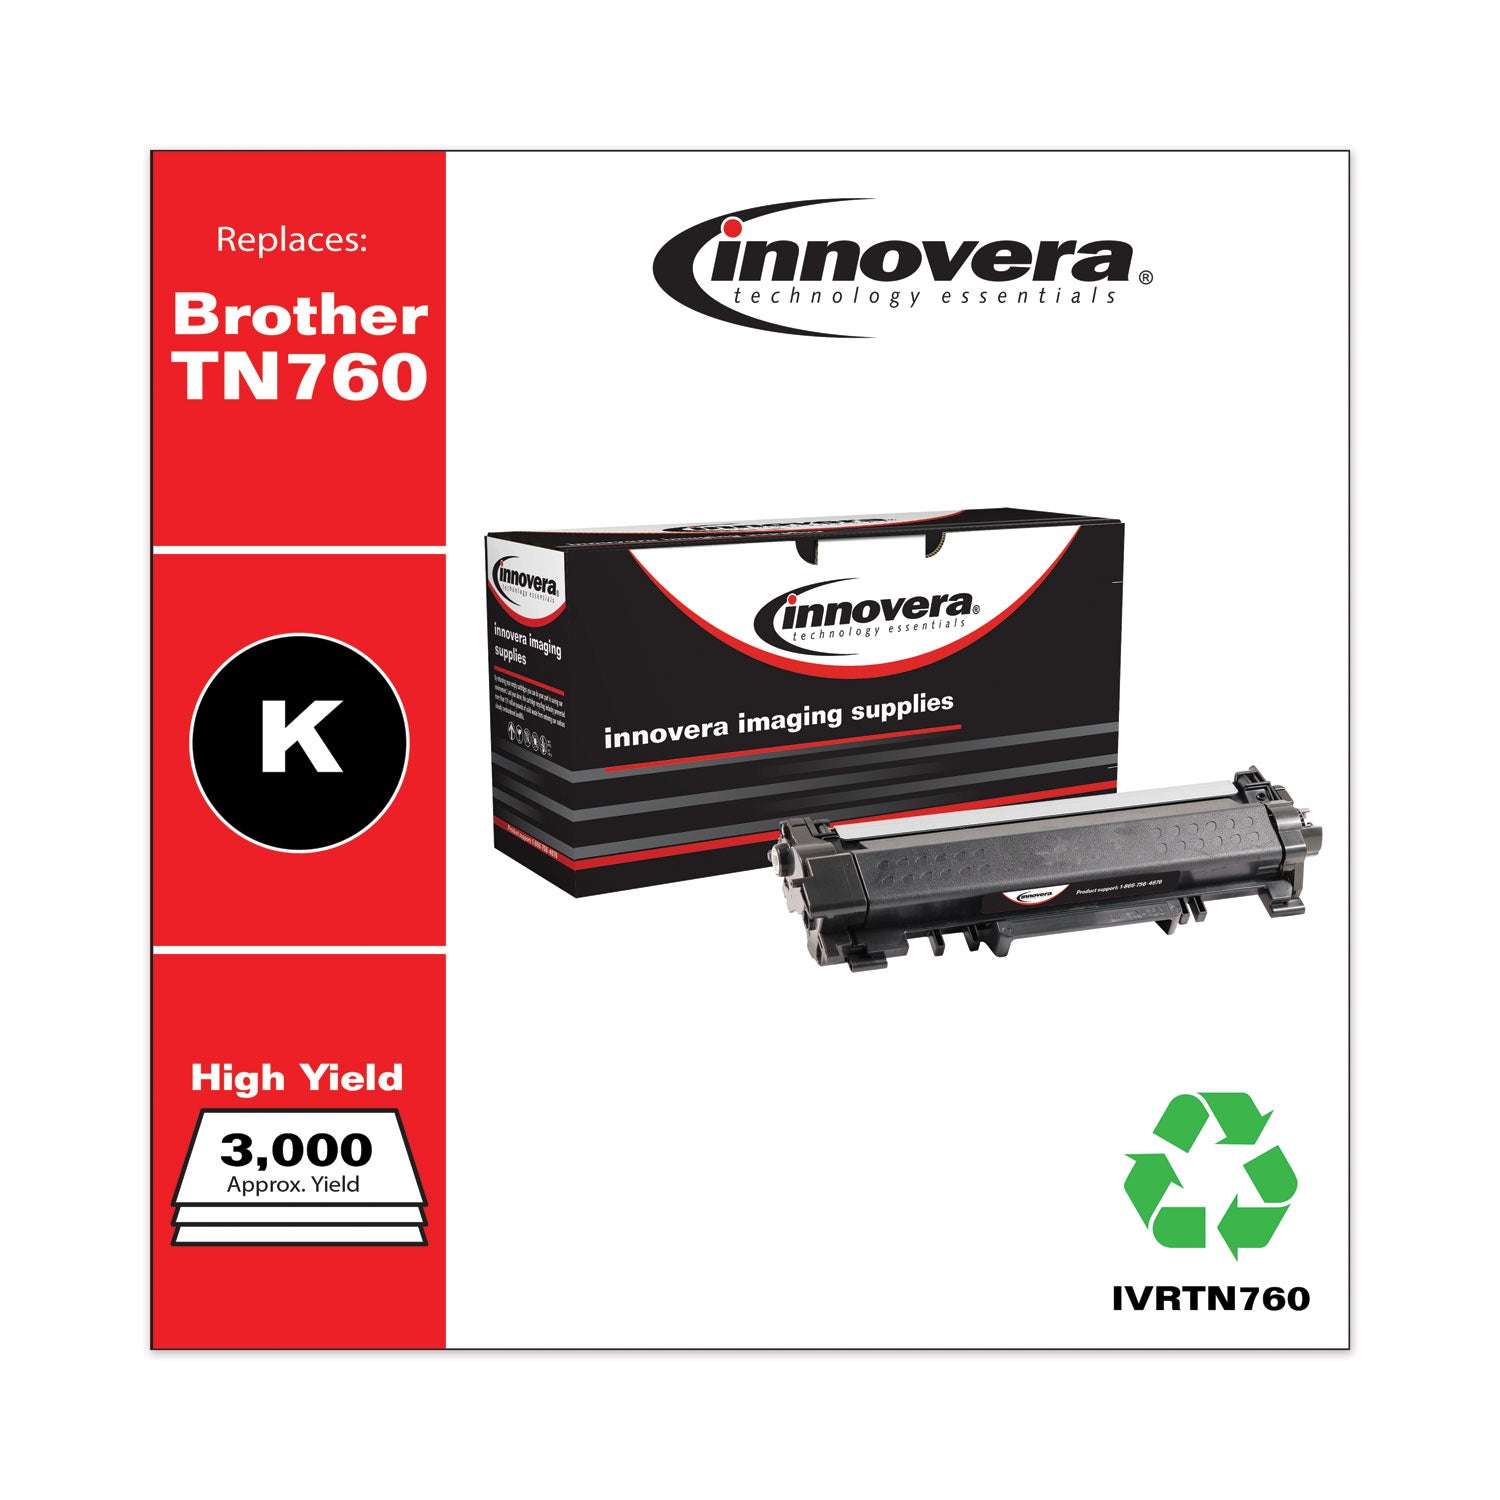 remanufactured-black-high-yield-toner-replacement-for-tn760-3000-page-yield_ivrtn760 - 2